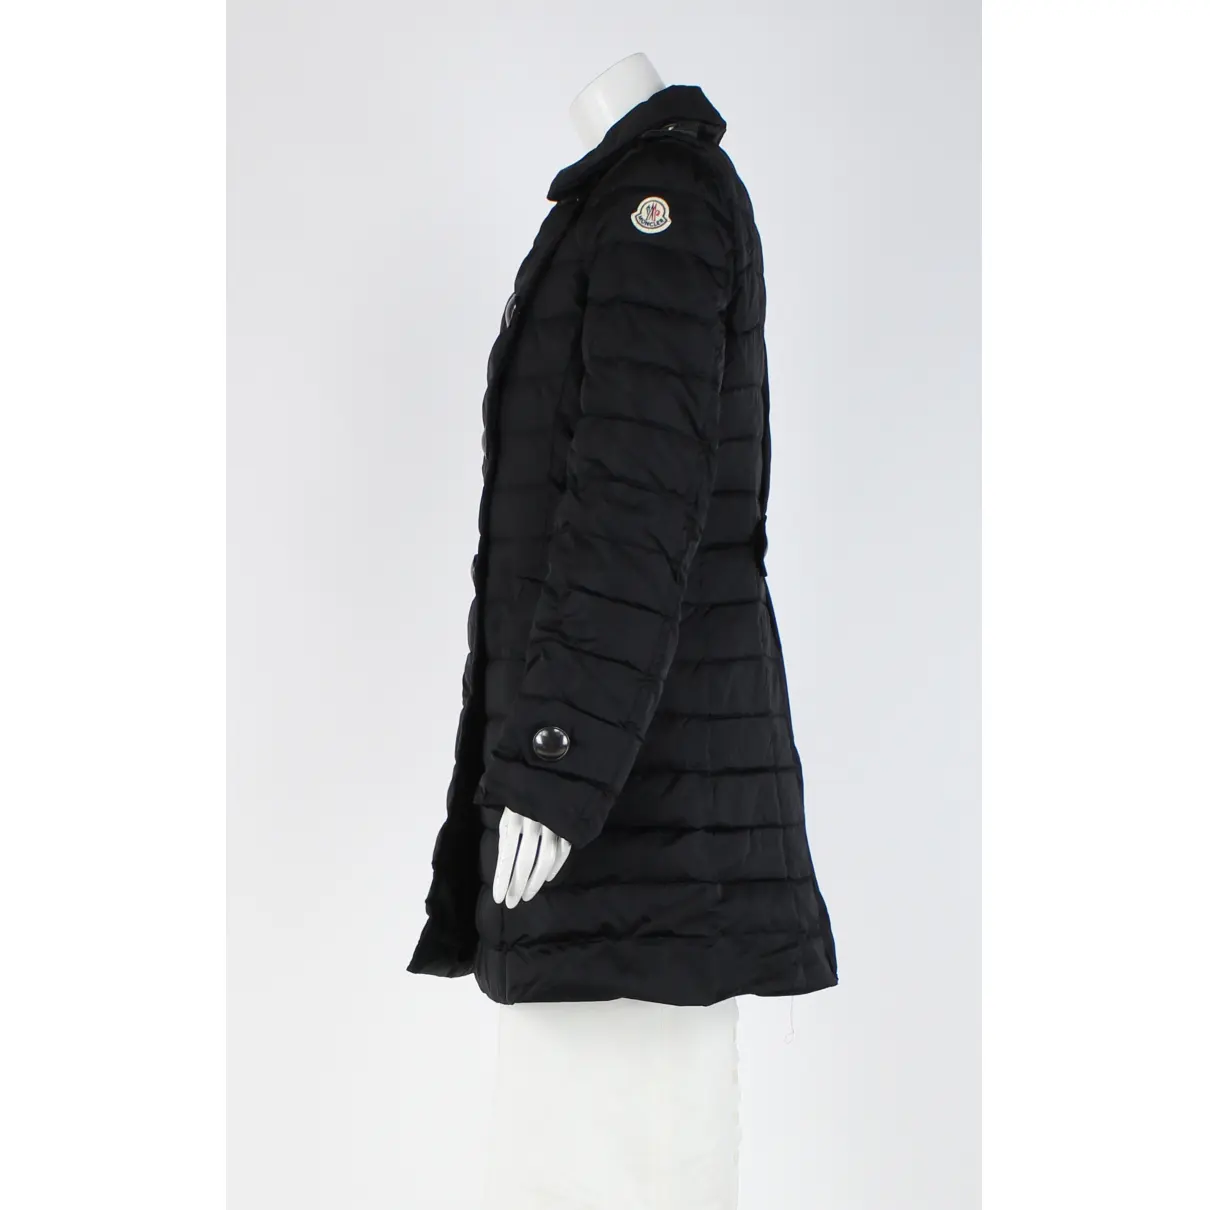 Buy Moncler Leather trench coat online